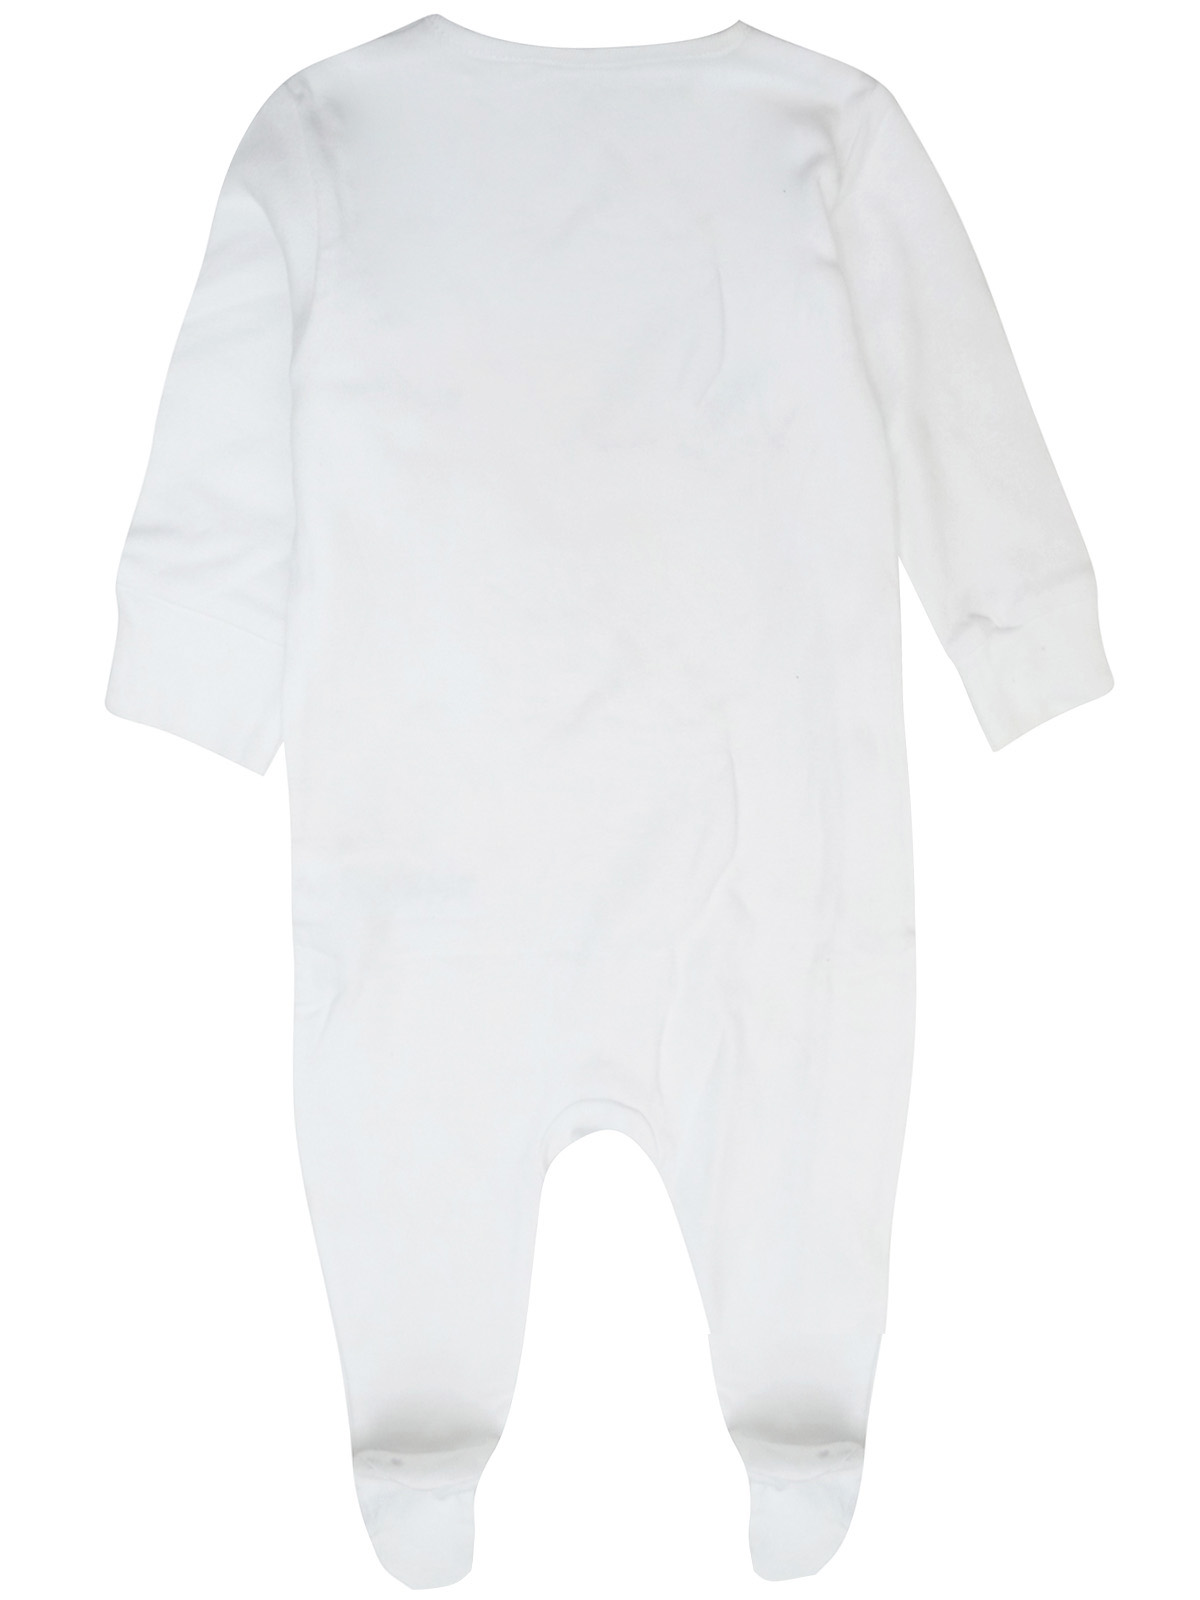 N3XT WHITE Unisex Baby Pure Cotton Sleepsuit - Size 3M to 3/6M